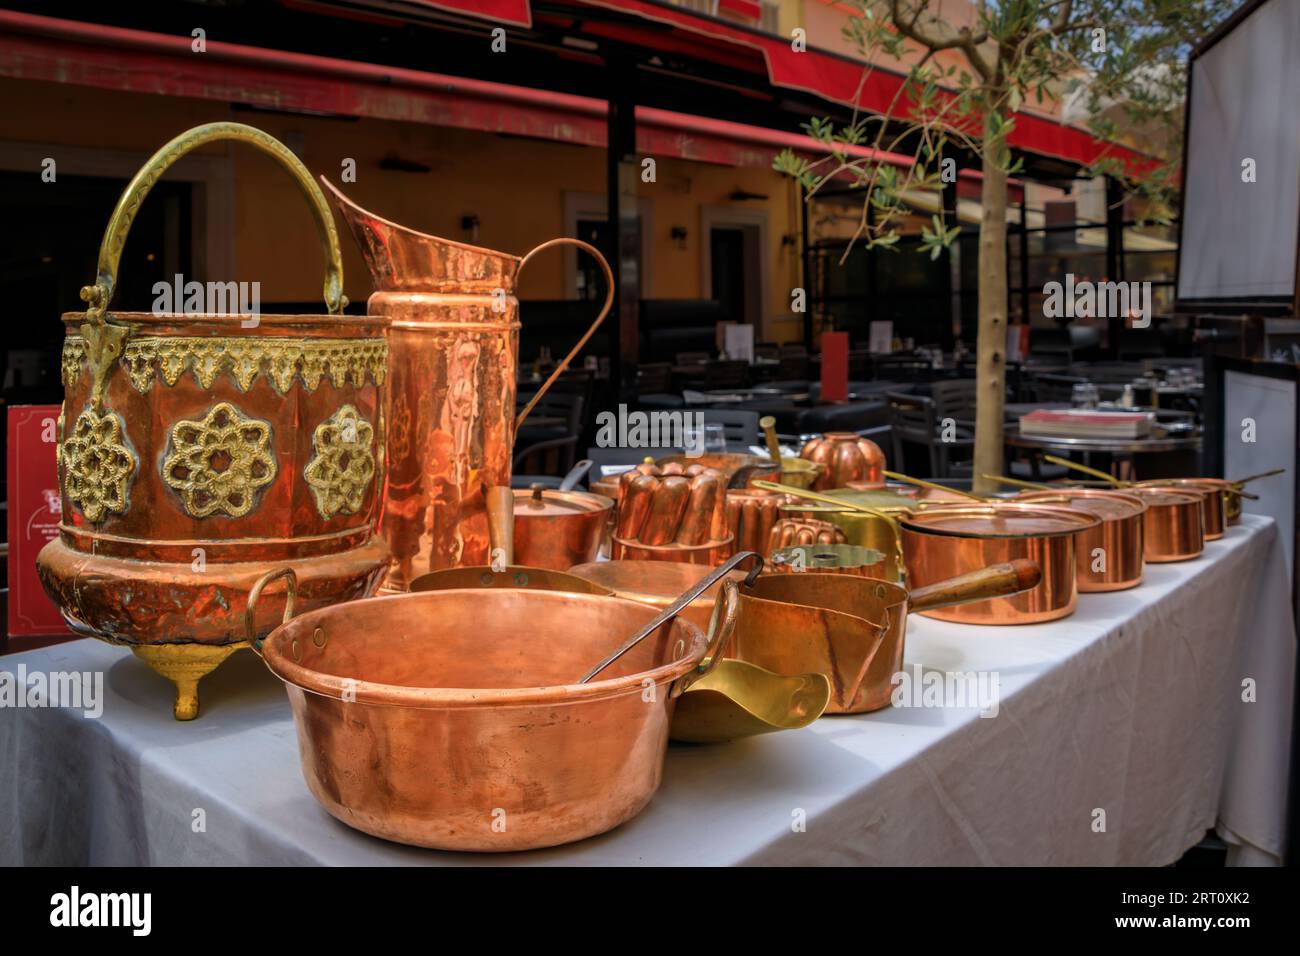 Vintage copper cookware pots and pans for sale at the Cours Saleya outdoor flea market in Old Town Vieille Ville, Nice, French Riviera South of France Stock Photo